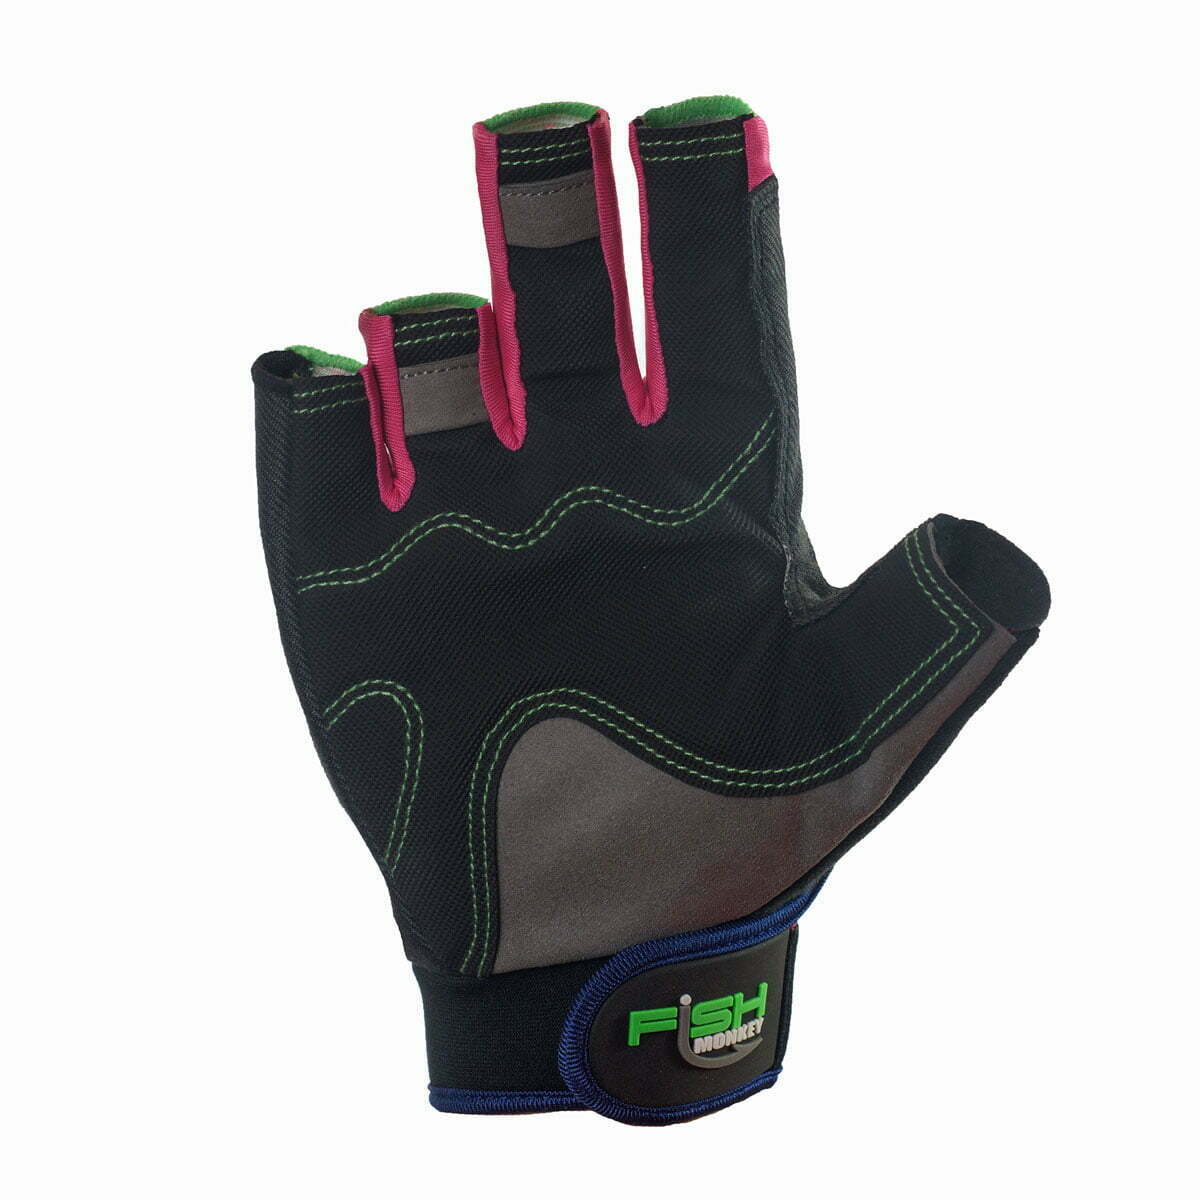 Fish Monkey The Crusher Half Finger Jigging Gloves Buy 1 @ 50% OFF or Buy 1 Get 2 Free at Price of One